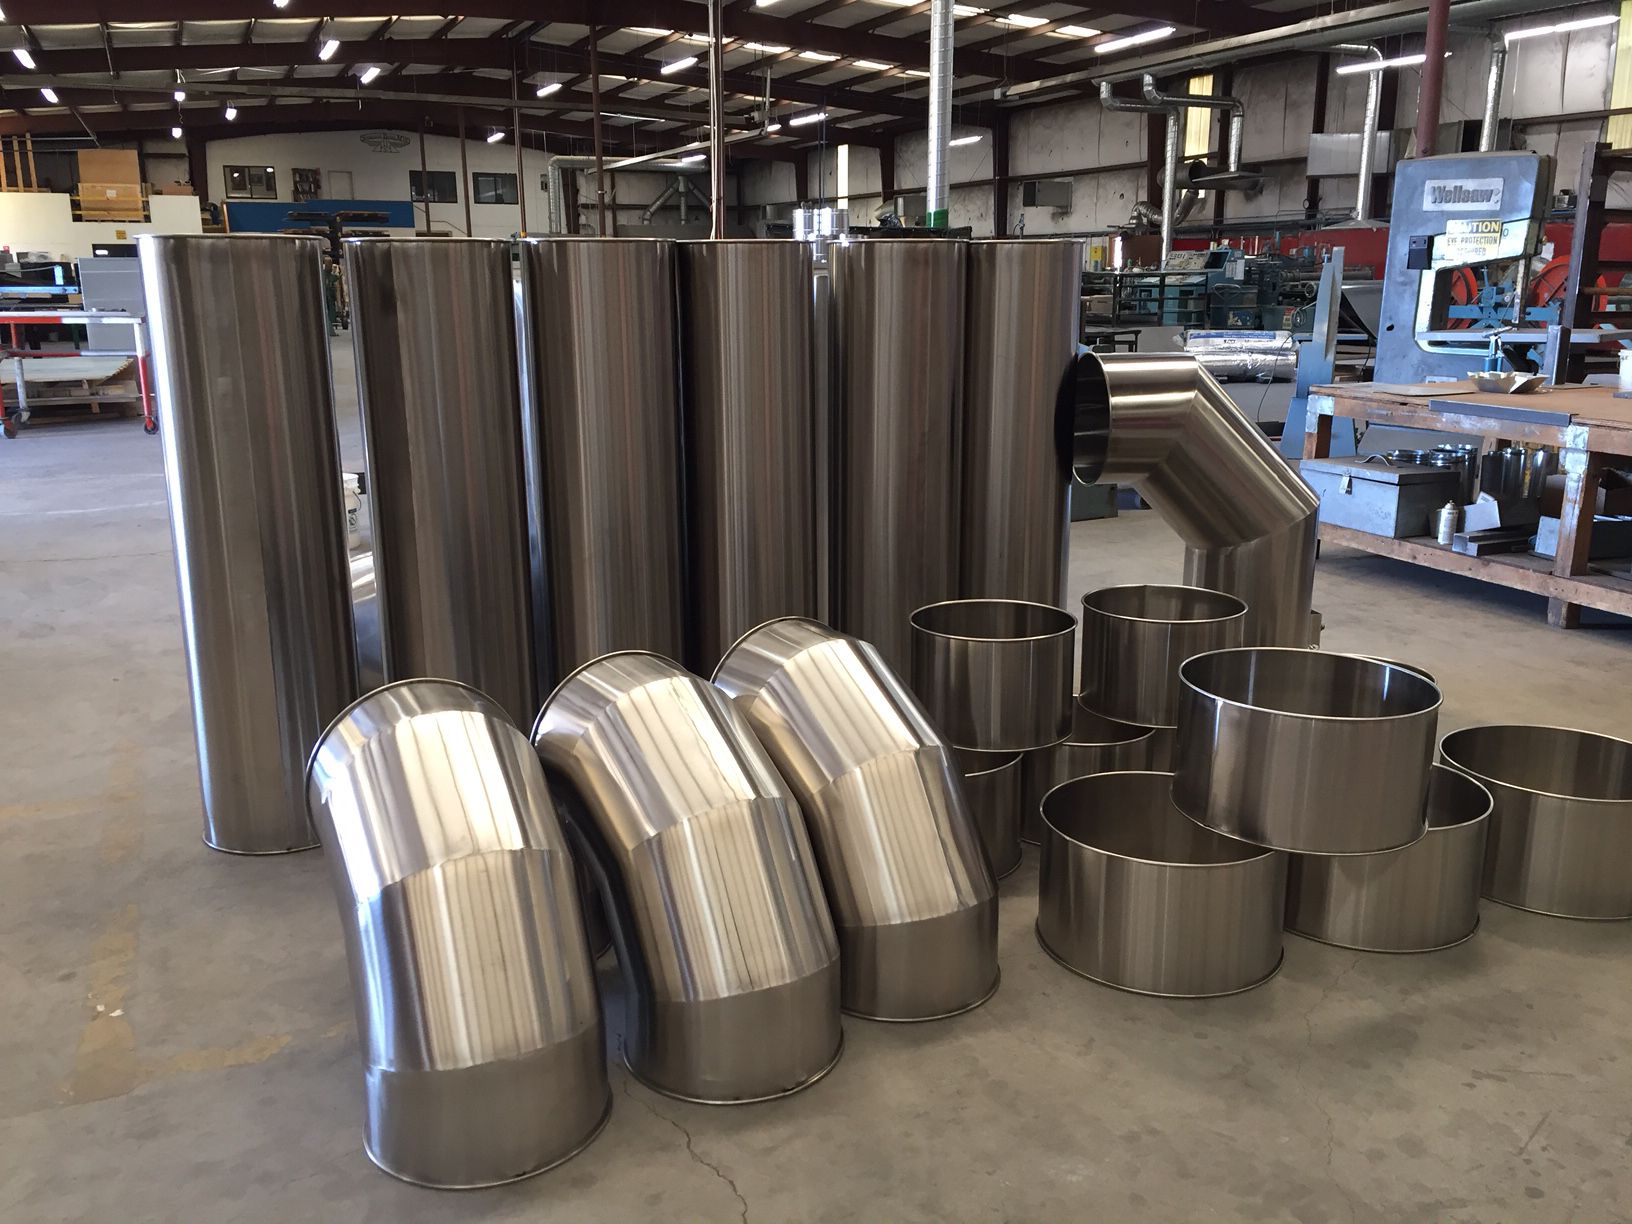 Stainless steel plus ductwork parts on display inside of a commercial warehouse.